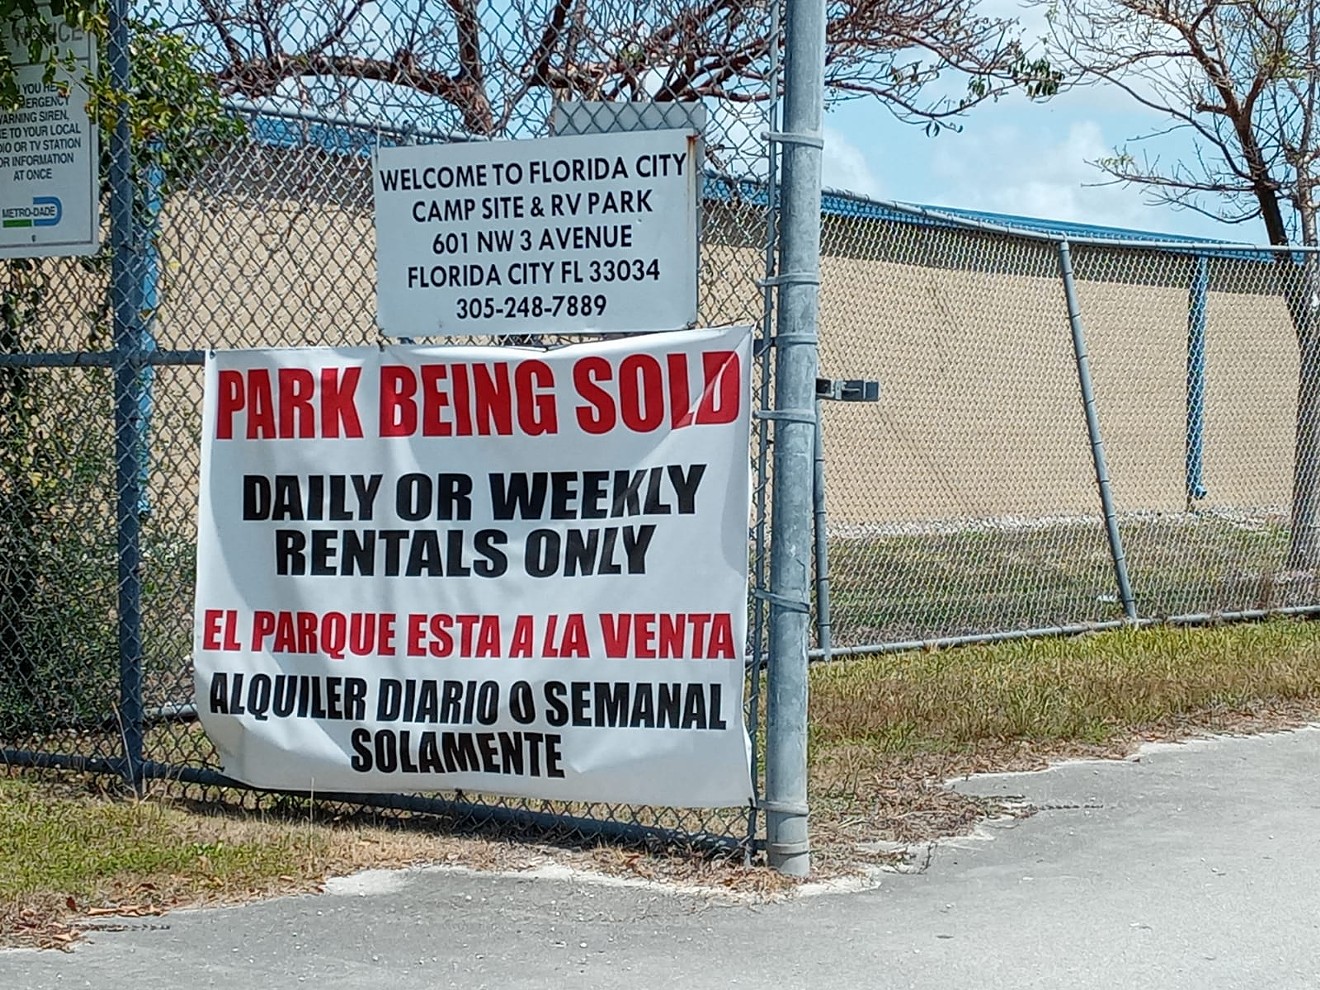 Florida City is selling the land rights to an RV park and telling residents they must leave.